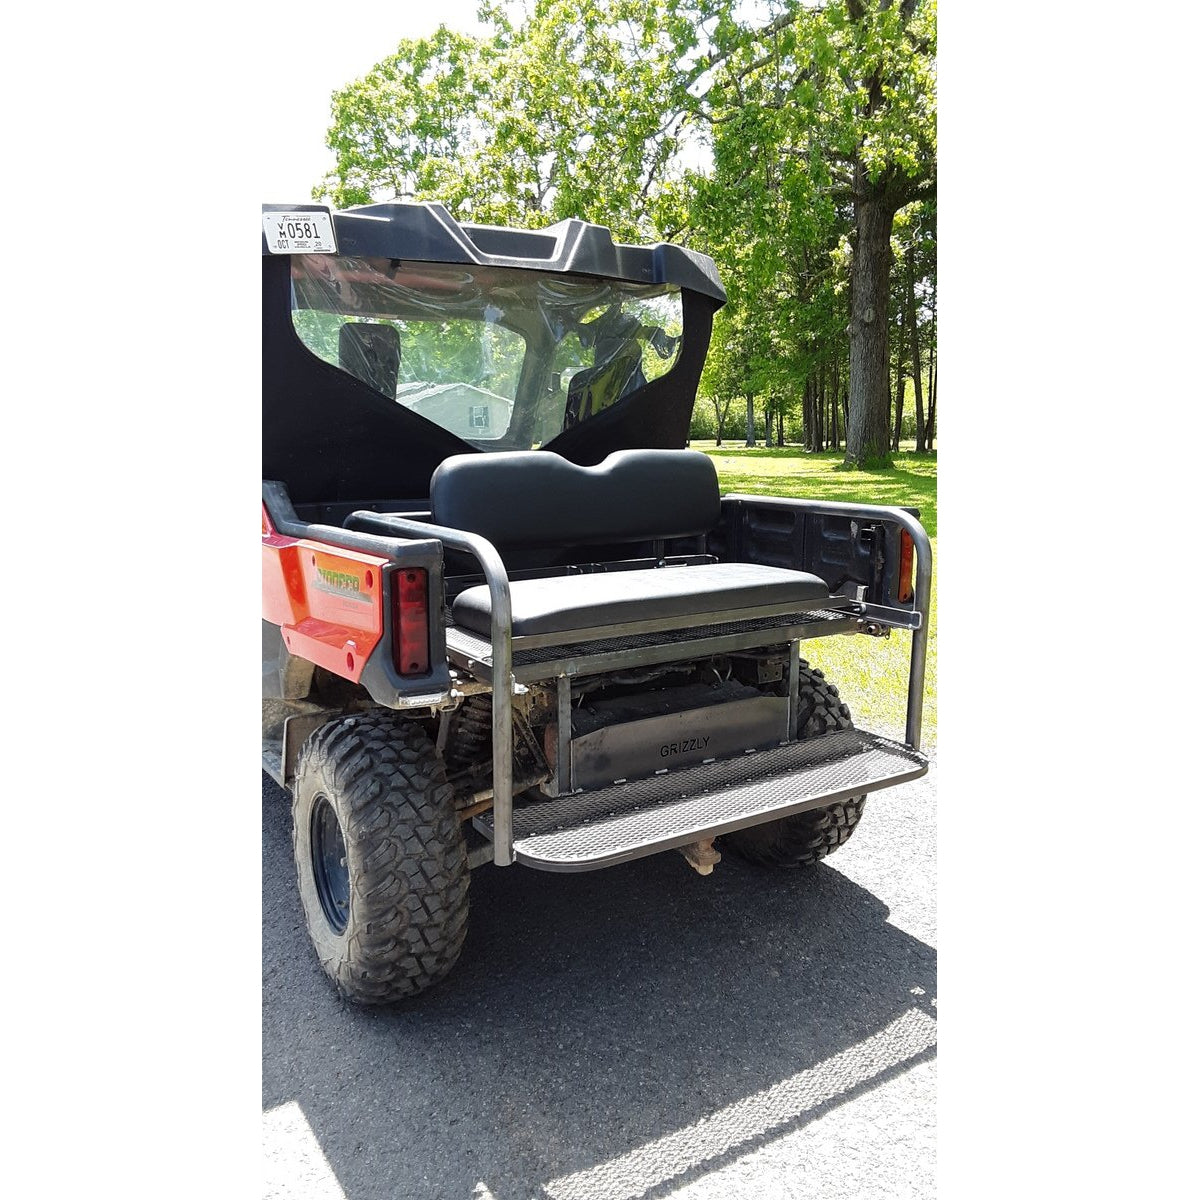 Honda Pioneer 1000-3 CUSTOM USA REAR WELDED FLIP SEAT ASSEMBLY Raw Metal, Includes Heat Shield - New Black Seat Cushion Set - 13 Ga Expanded Smooth Sheet Metal - ADD'L OPTIONS AVAILABLE- Seat Belts & Heavy Duty 2